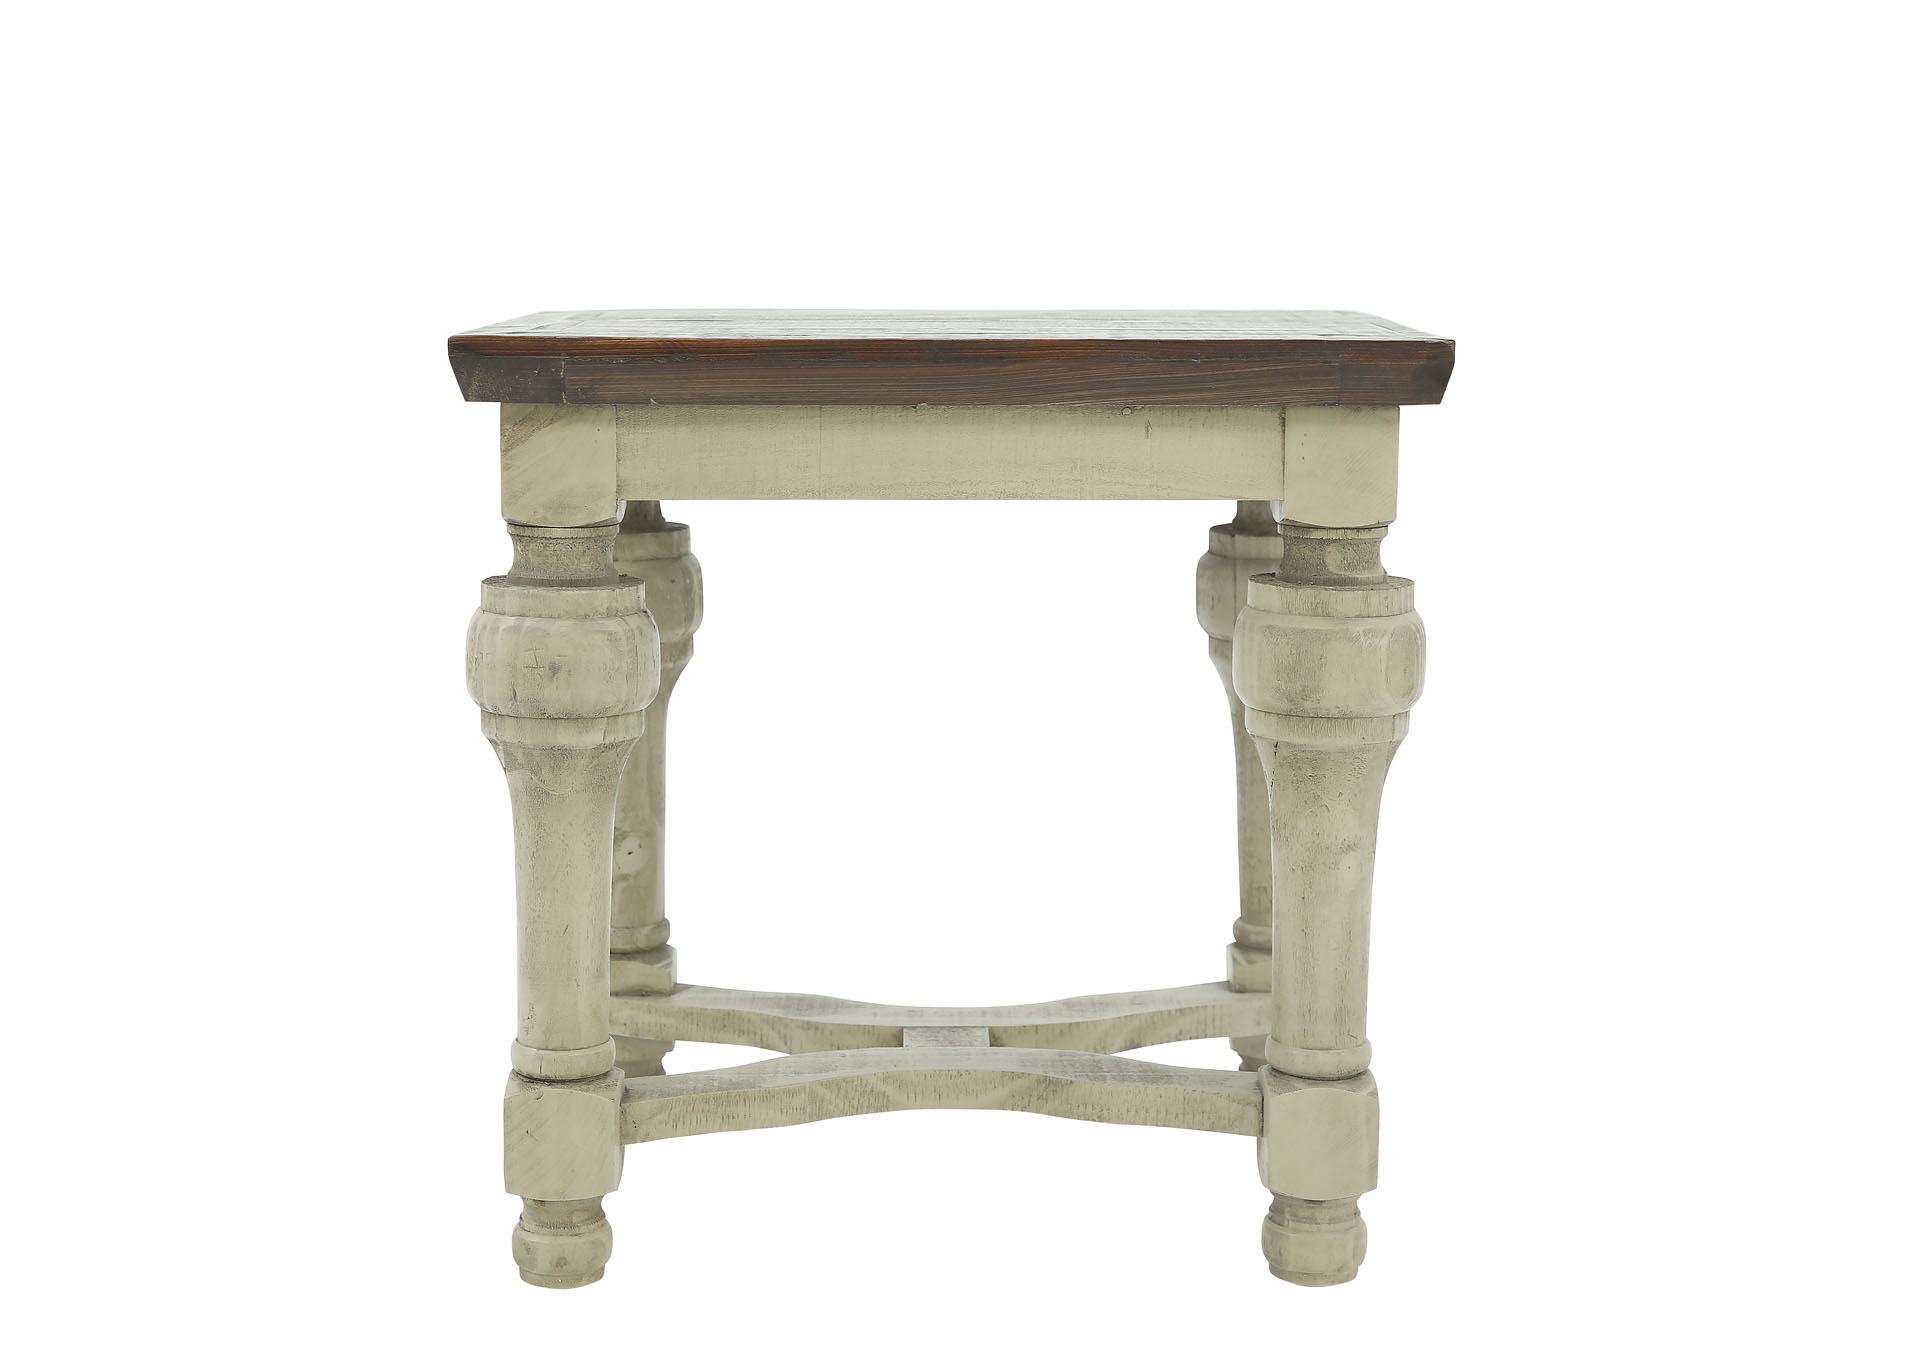 JAMISON CHAIRSIDE TABLE,ARDENT HOME